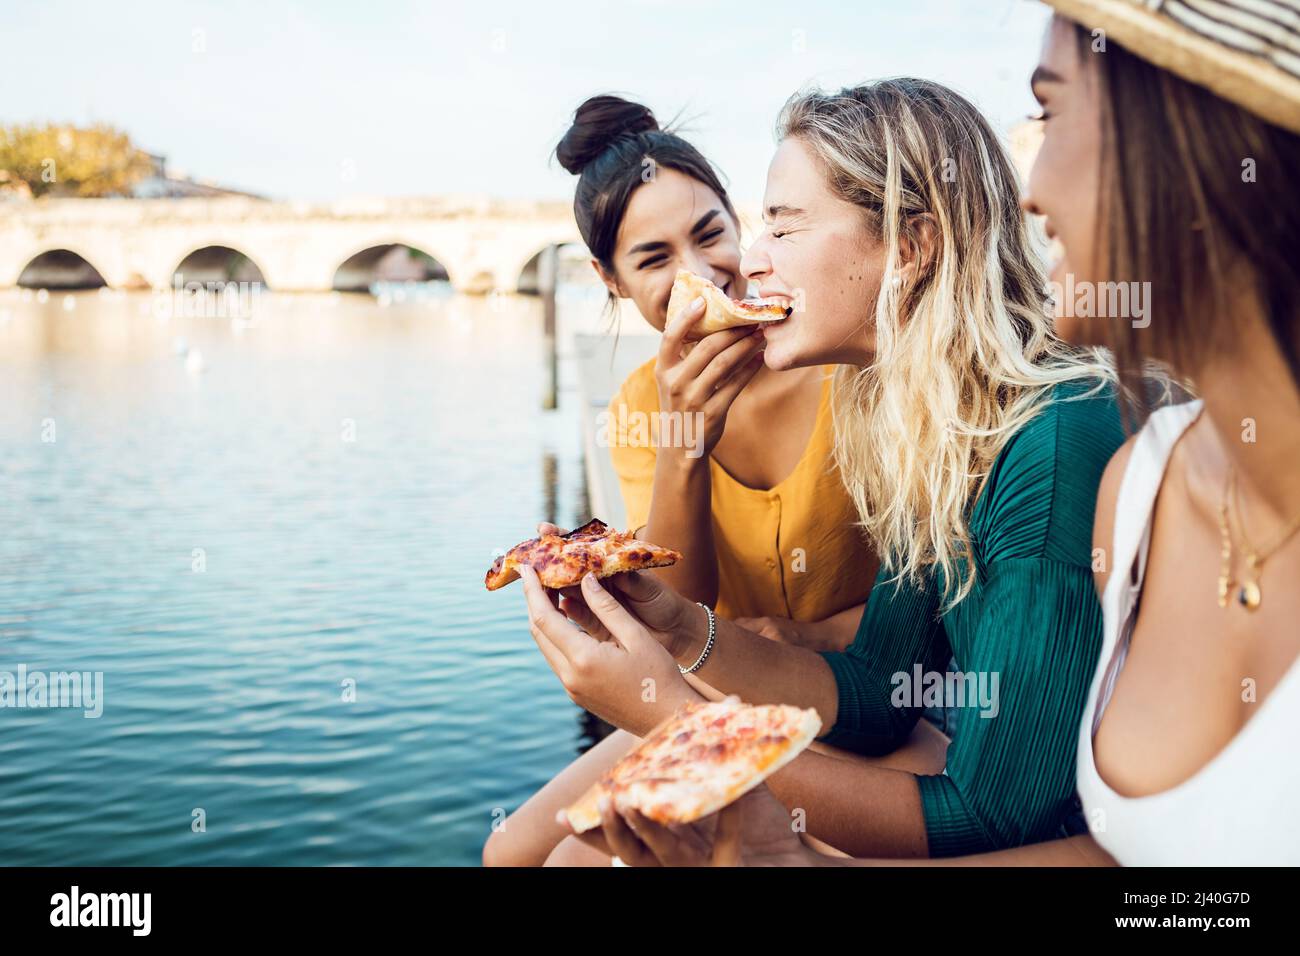 Diverse young women friends eating italian take away pizza in city street Stock Photo